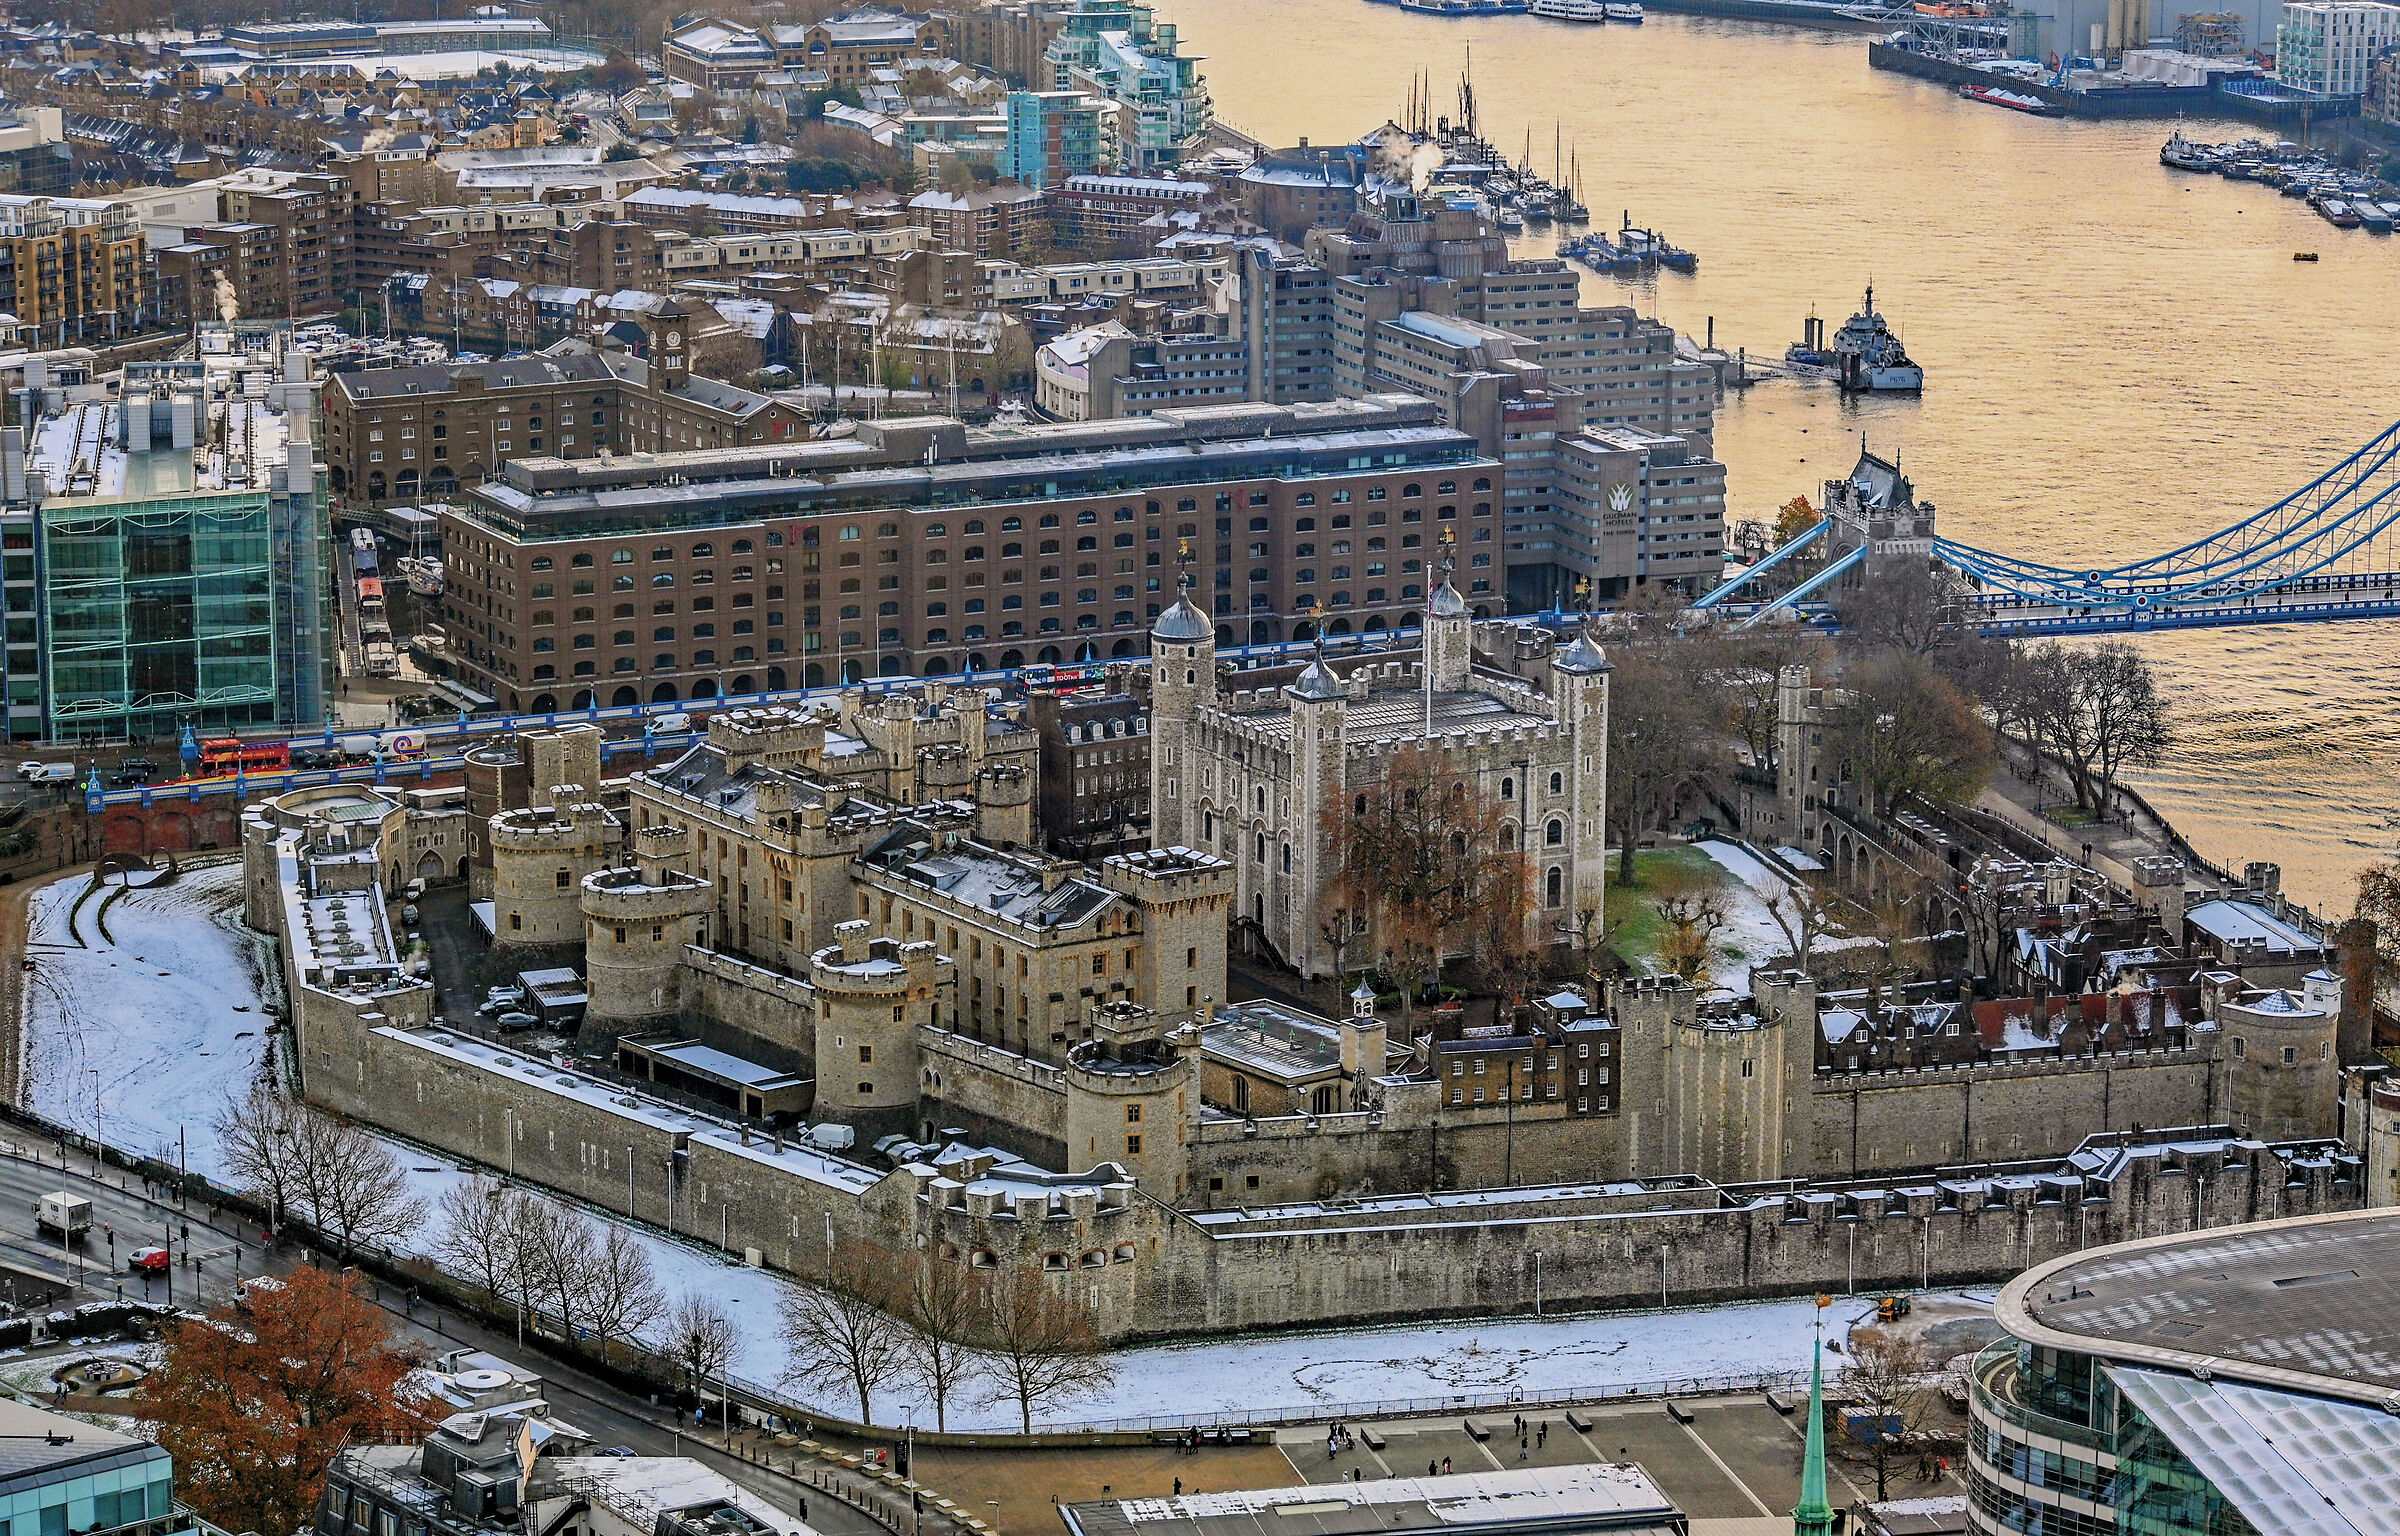 The Tower of London...